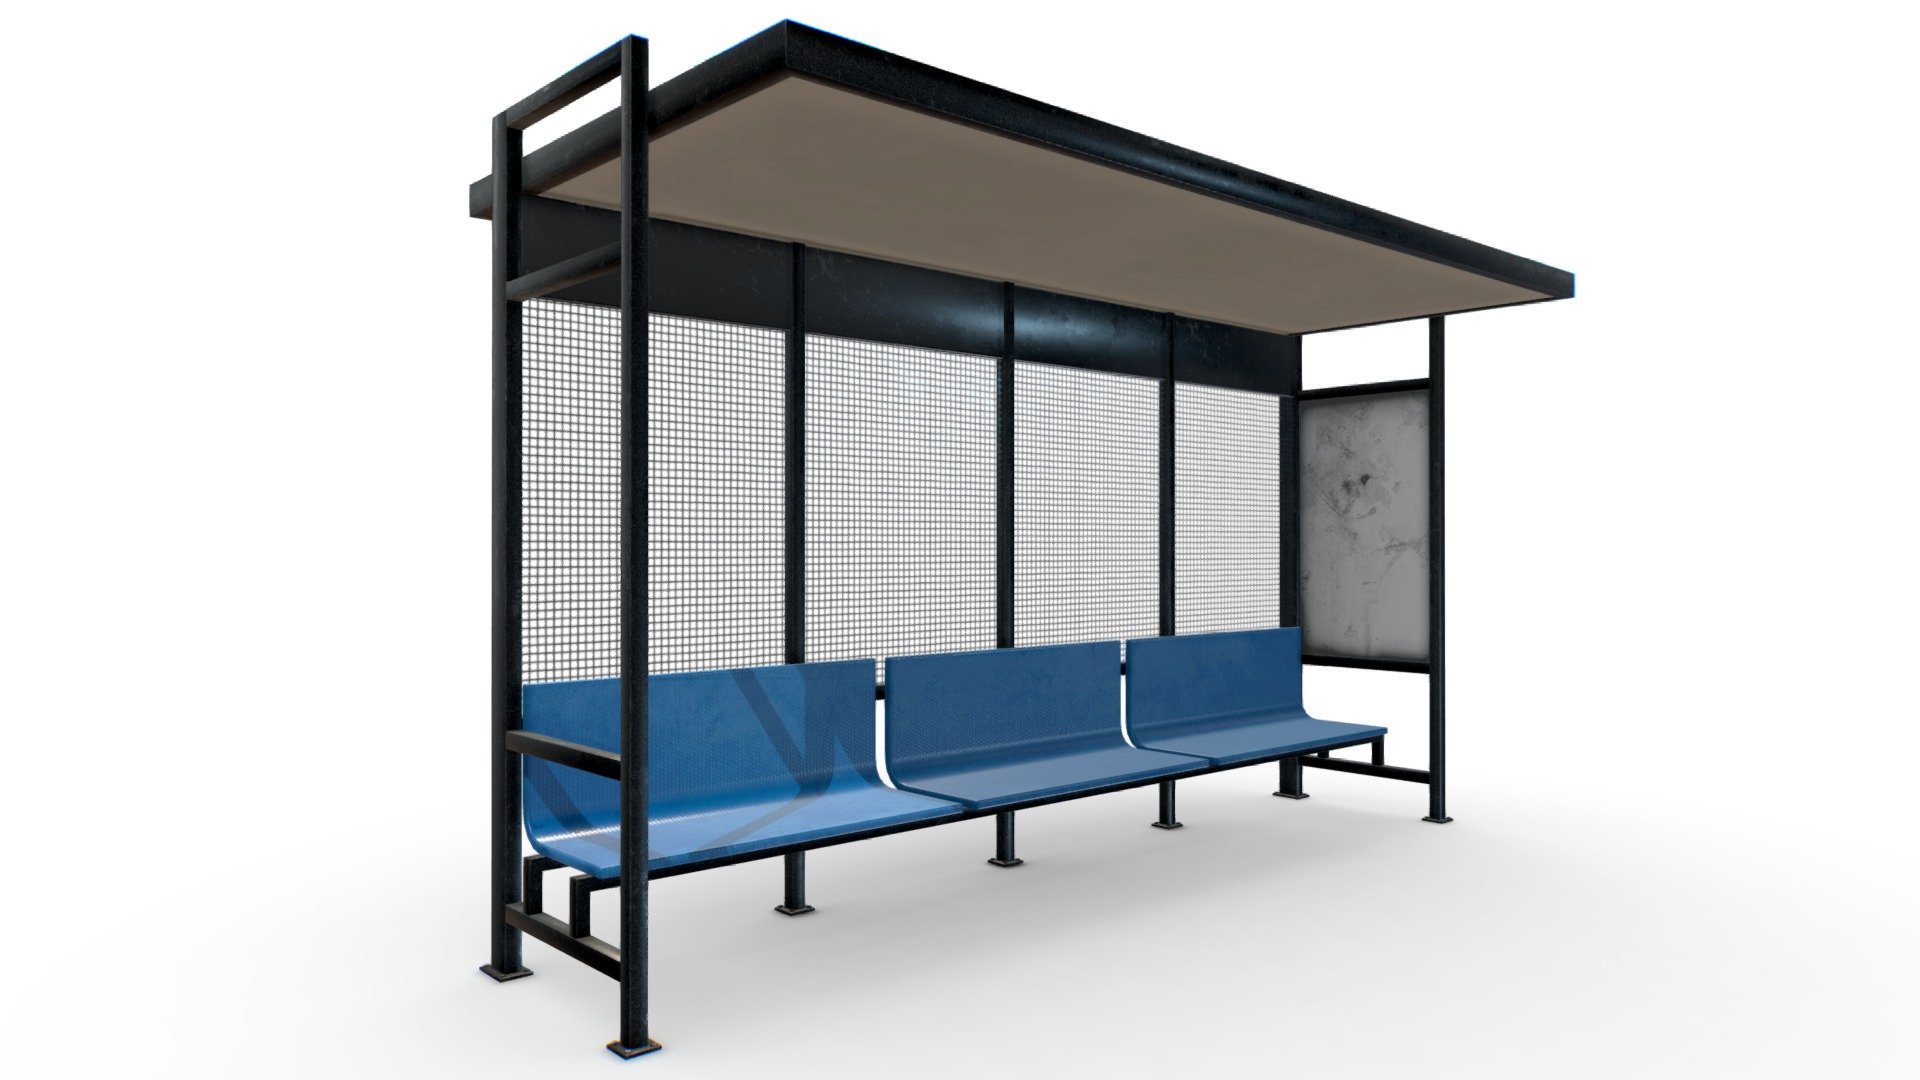 Bus stop structured in metallic bars with textured plastic seats aged by time and use 3d model